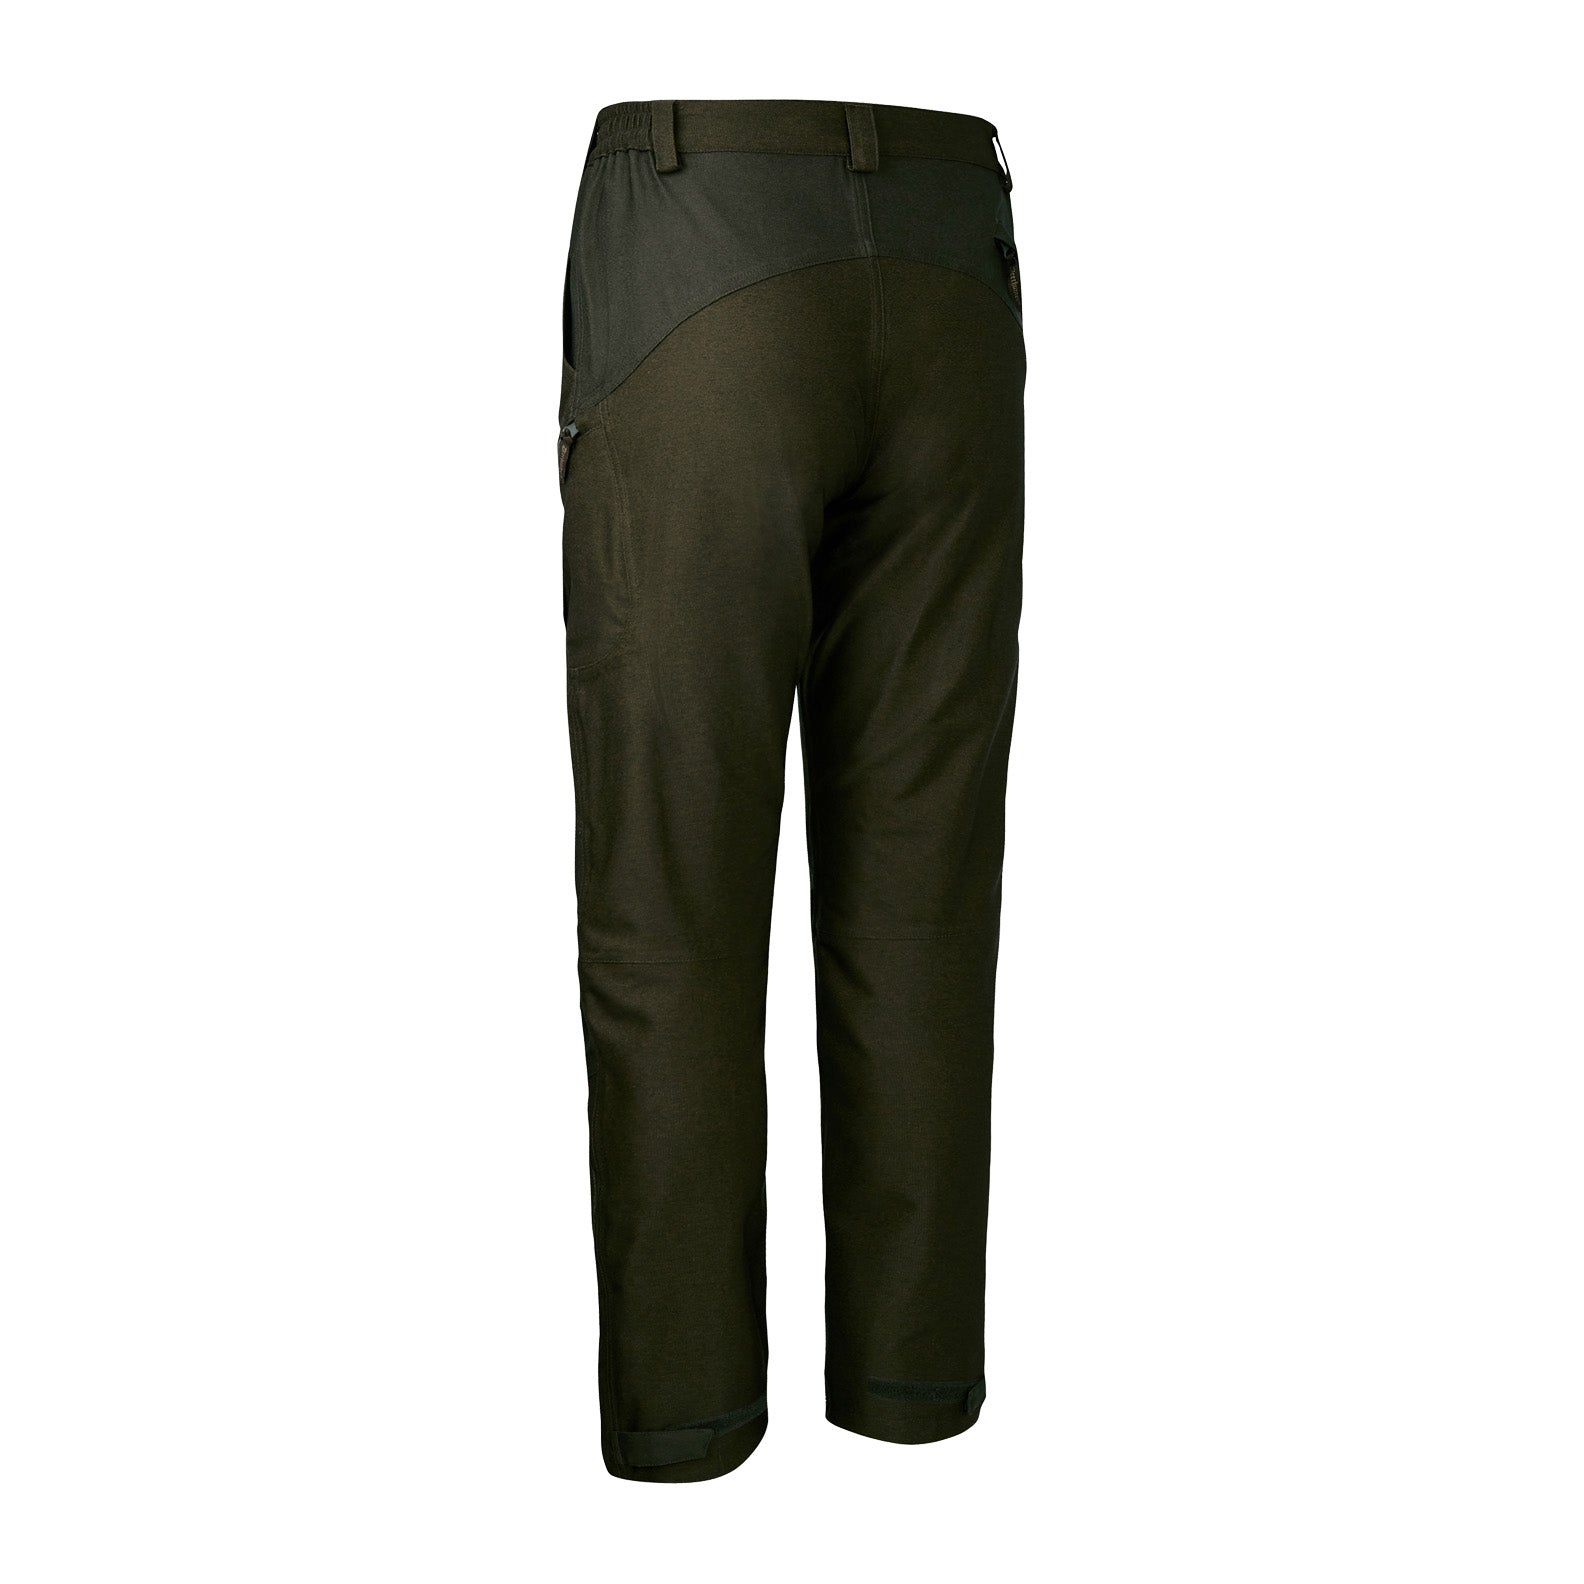 Deerhunter-Lady-Chasse-Trousers